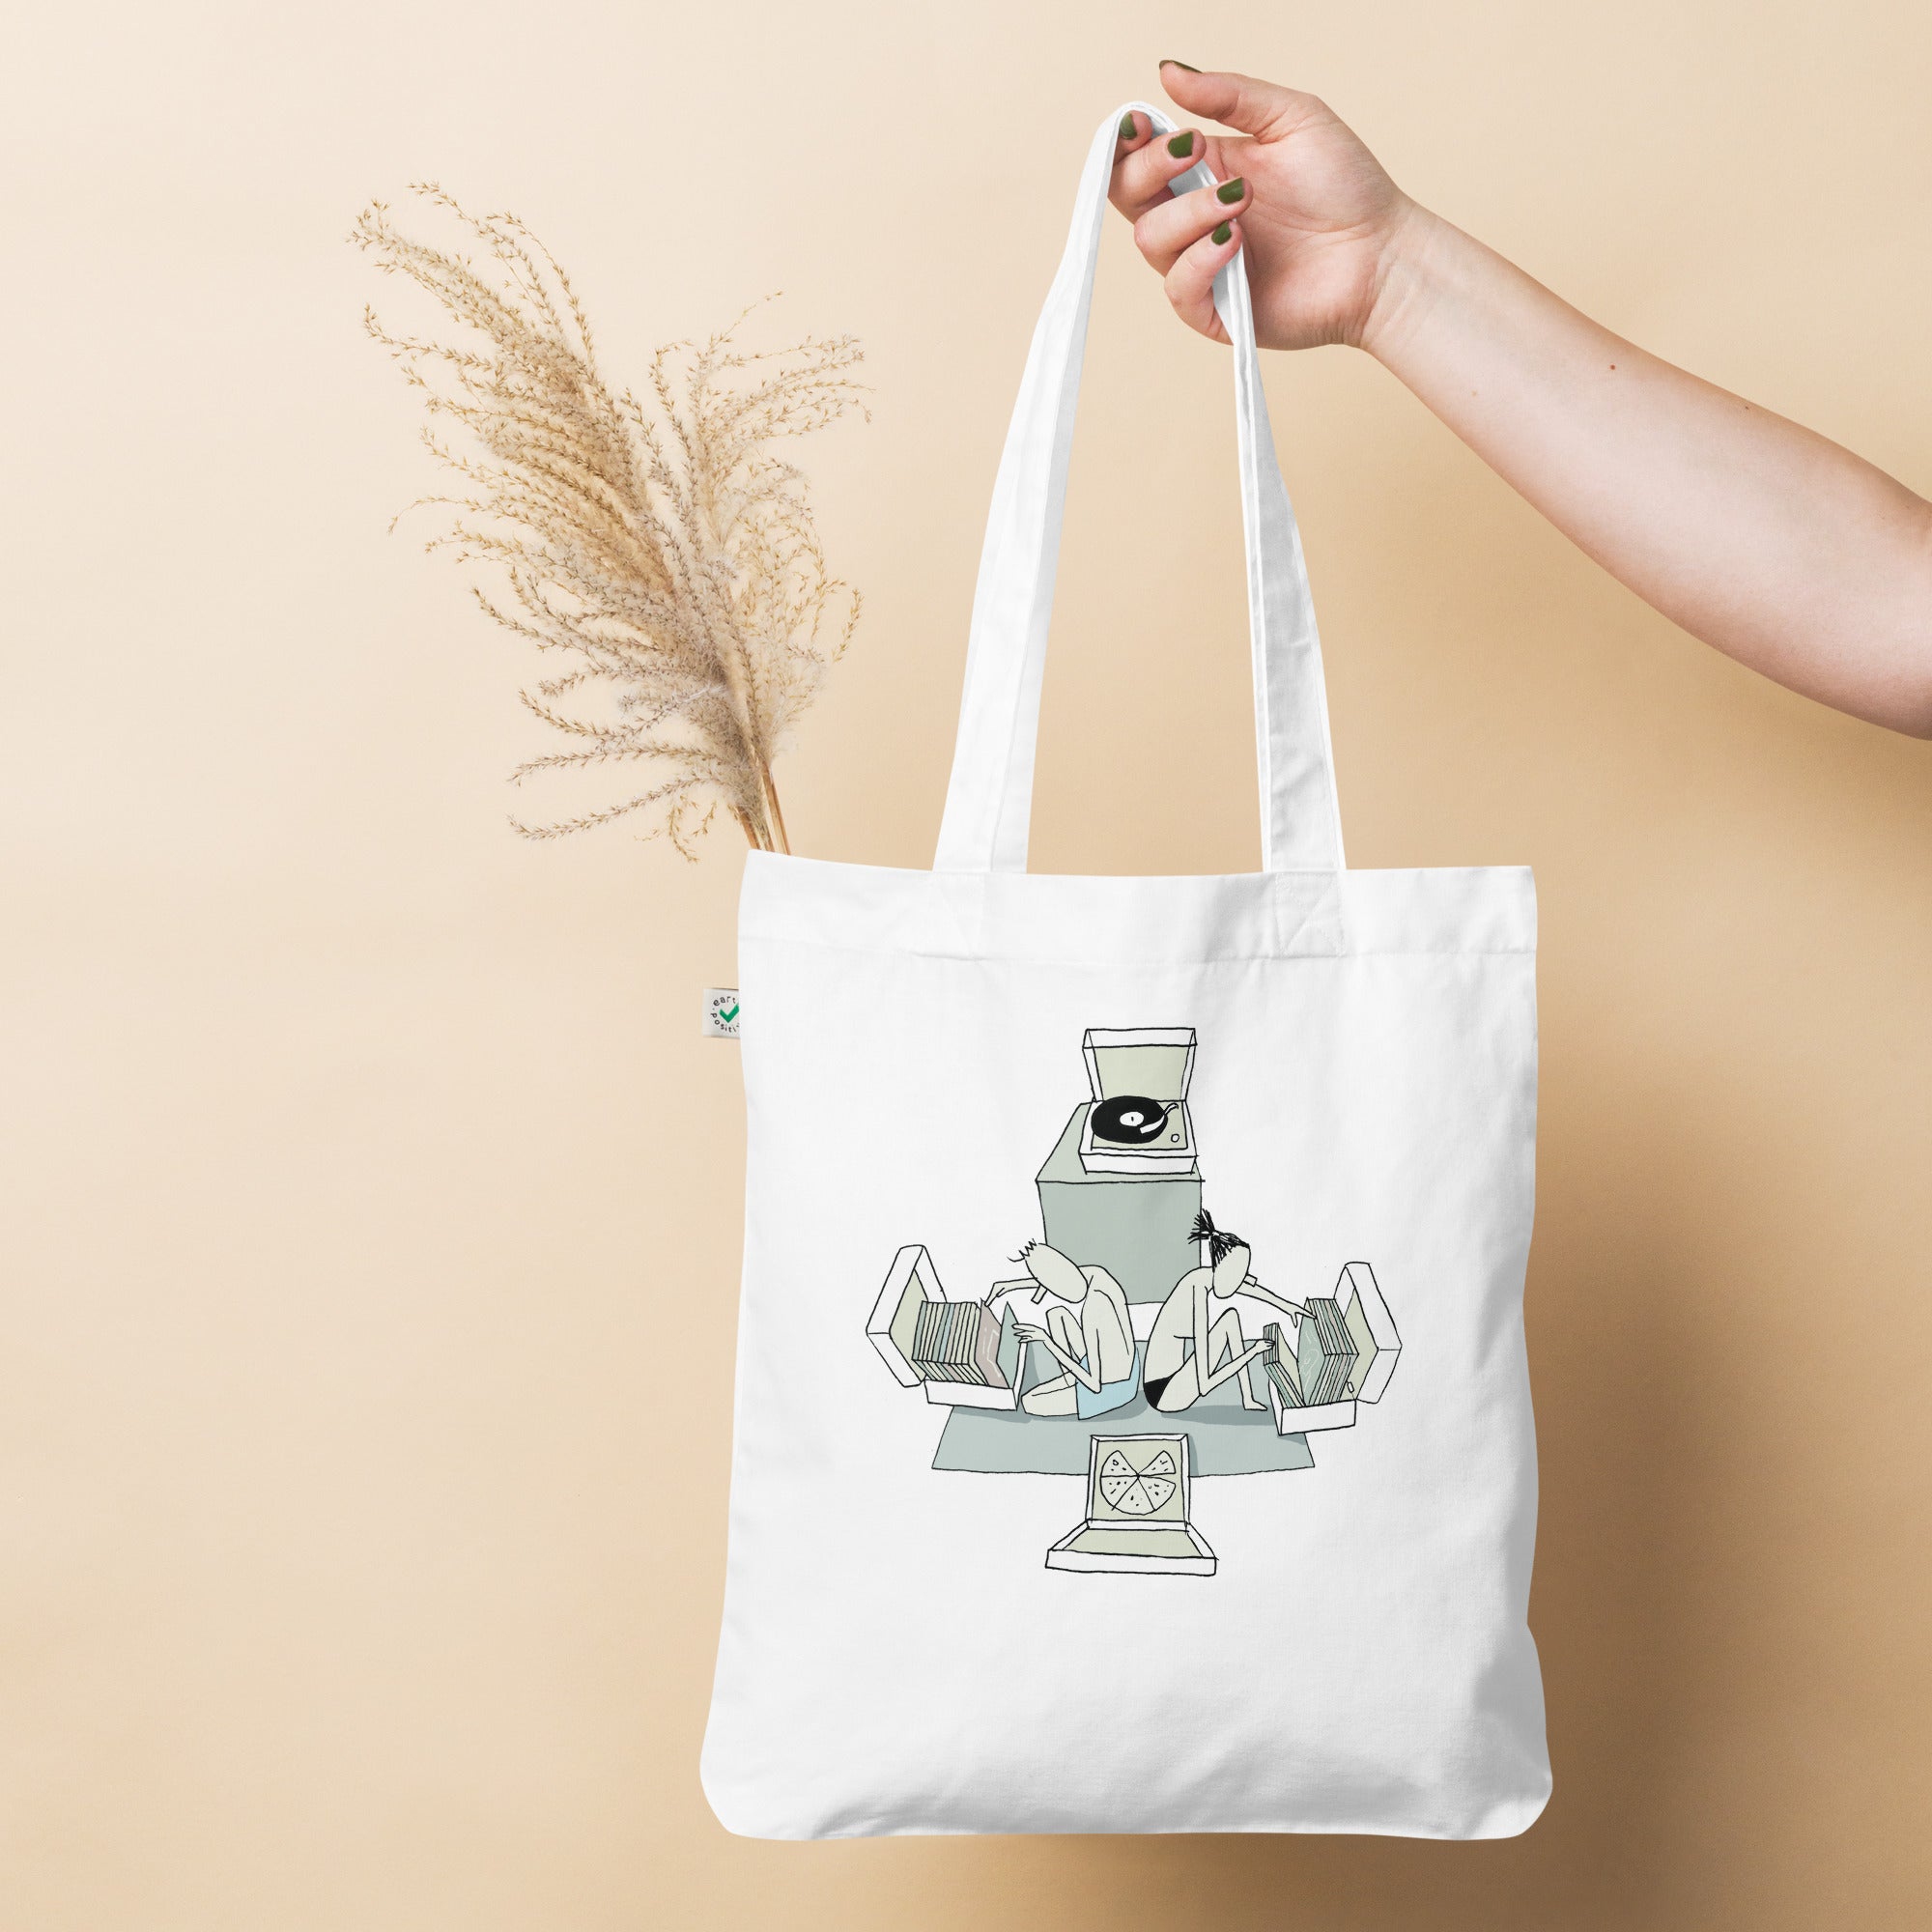 Afternoon Delight Organic fashion tote bag